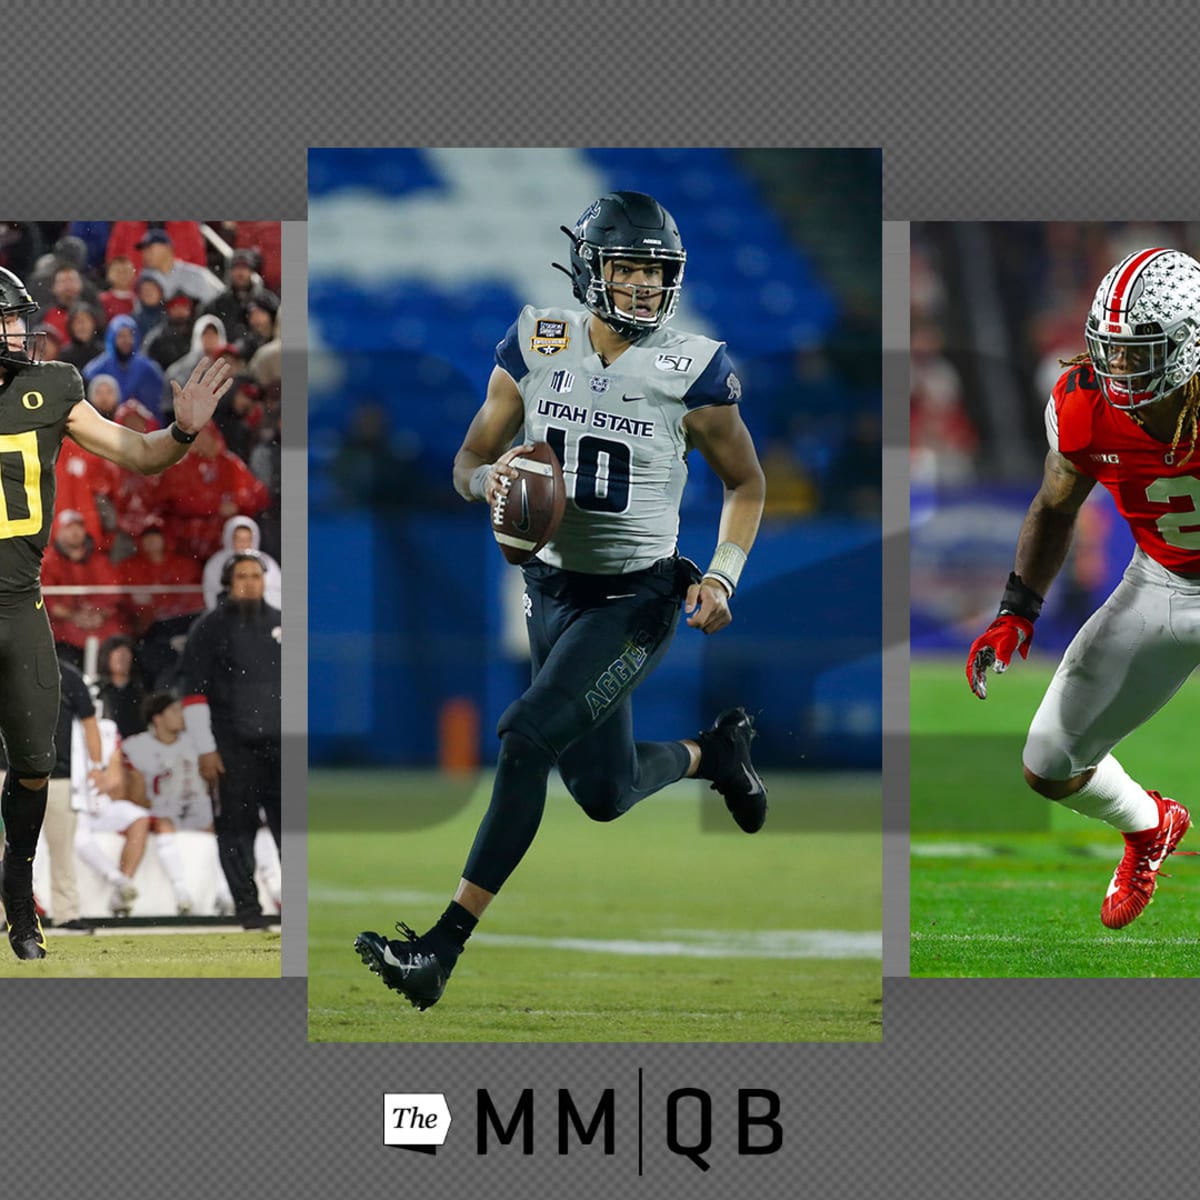 2020 Mock Draft 5.0: All seven rounds and 255 picks - The Athletic